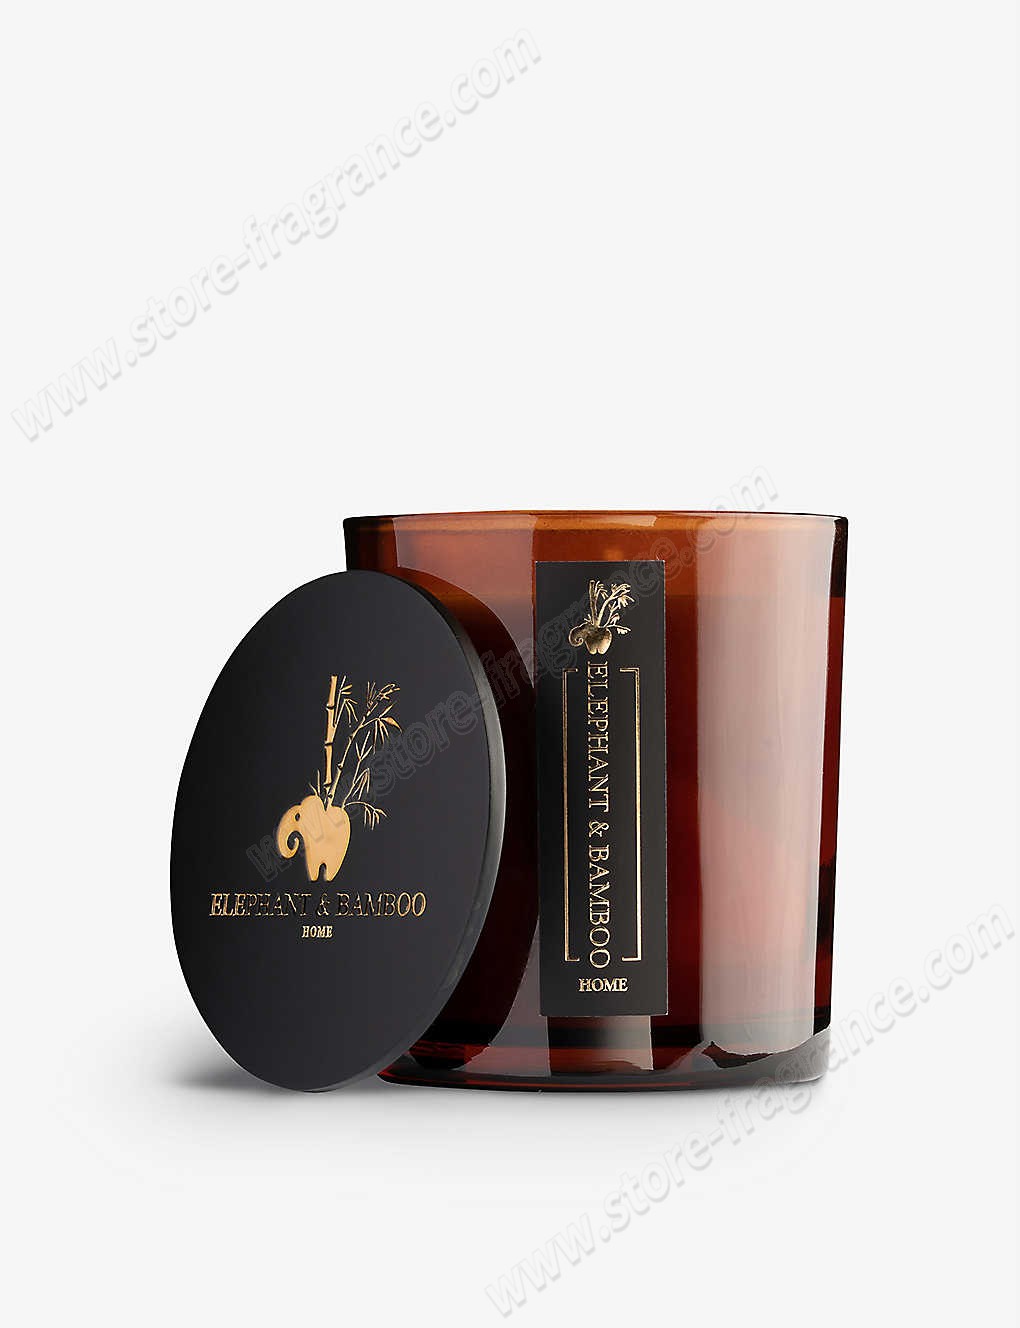 ELEPHANT & BAMBOO/Egyptian Amber scented candle 300g ✿ Discount Store - ELEPHANT & BAMBOO/Egyptian Amber scented candle 300g ✿ Discount Store